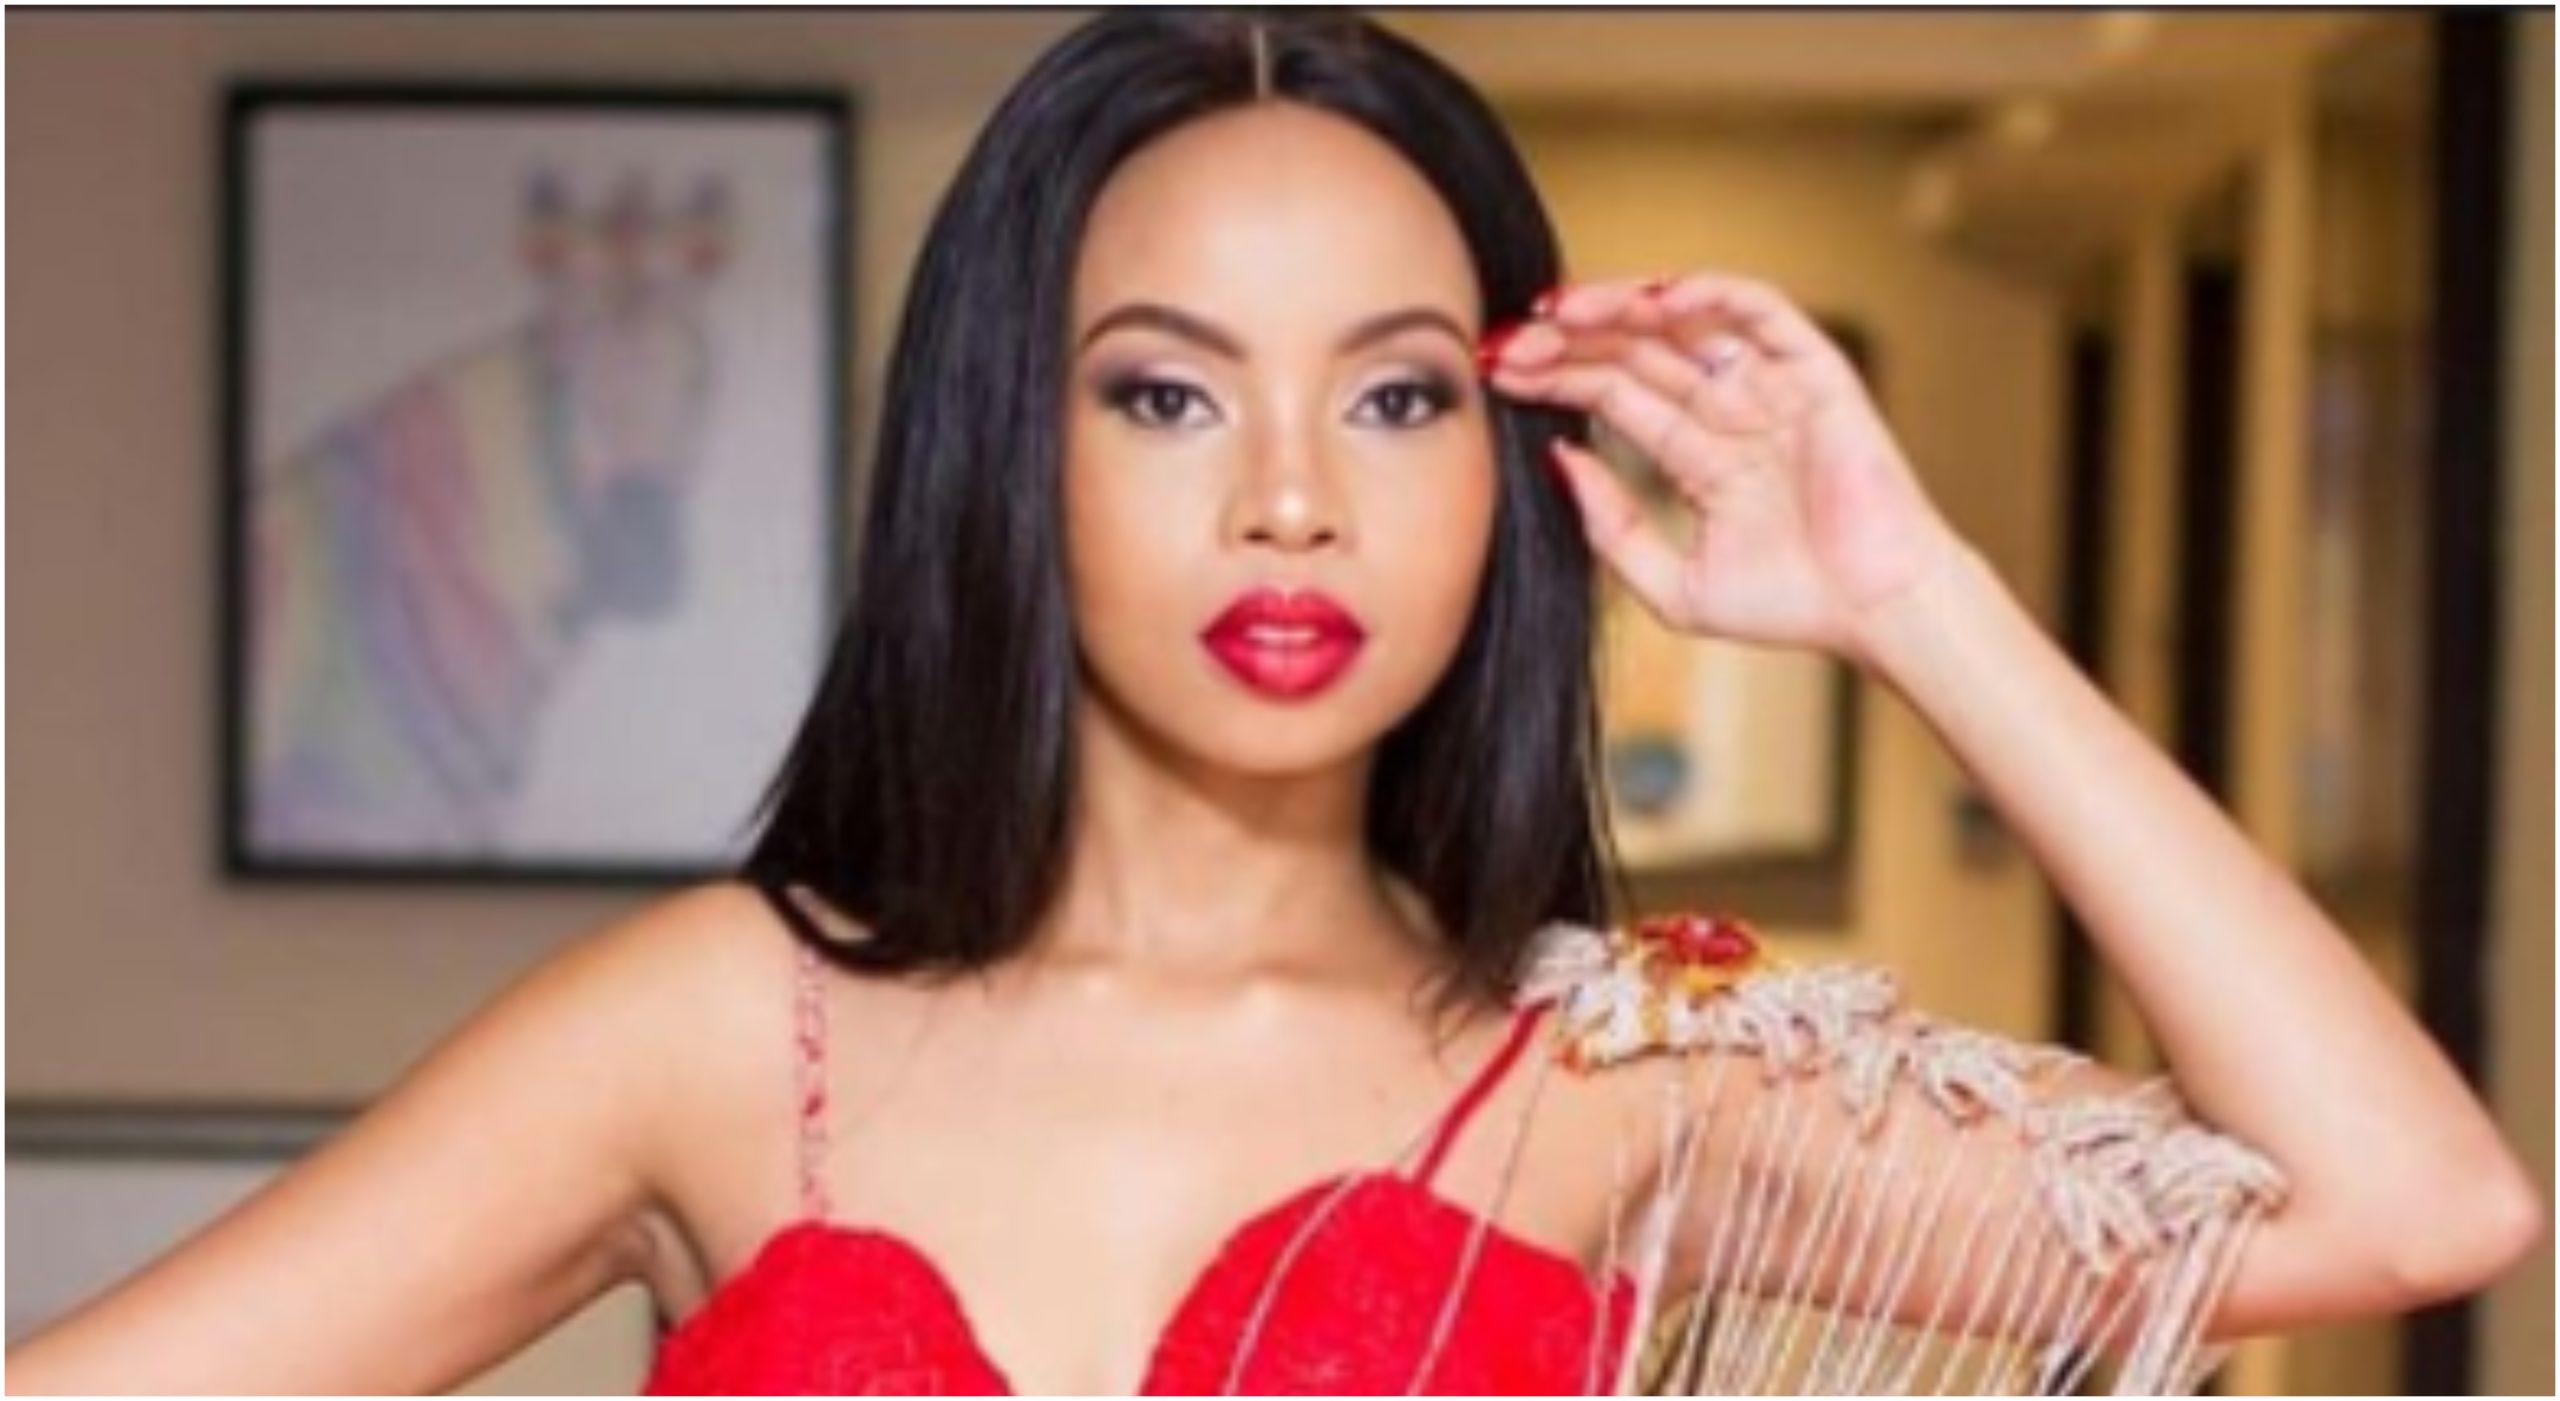 Brenda Wairimu issues stern warning against young men thirsting over her, sparks hilarious reactions